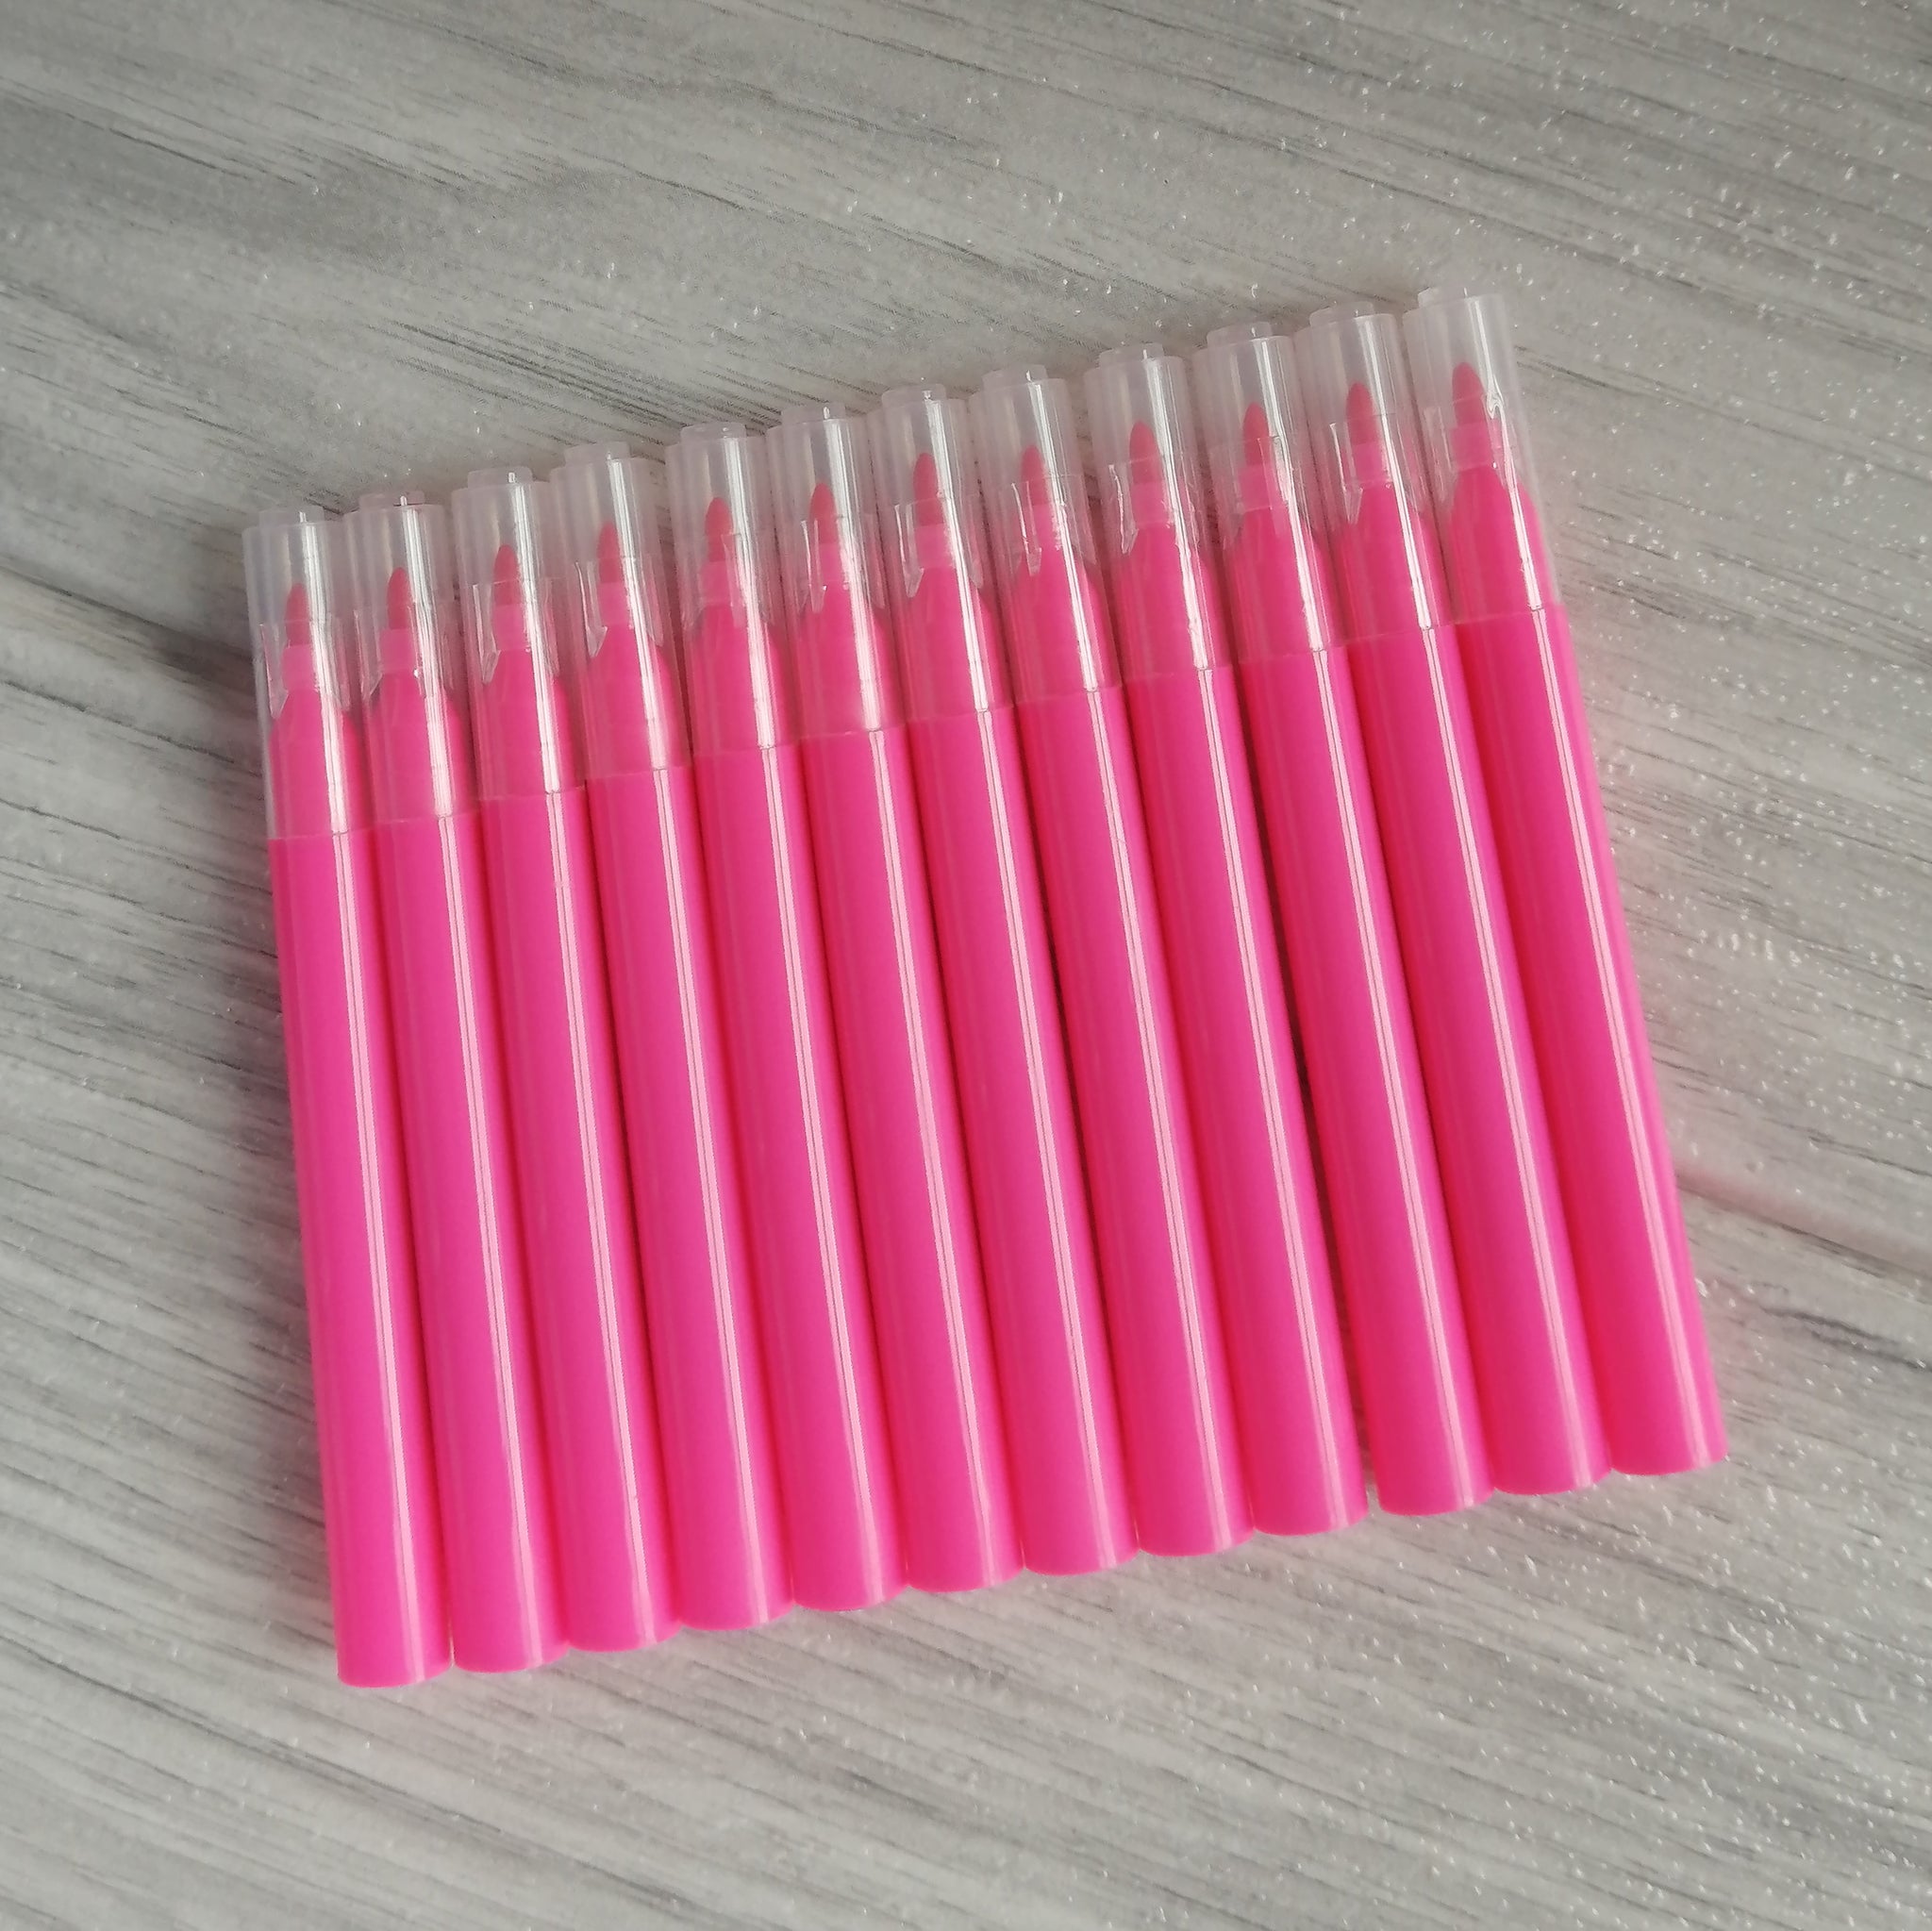 Mini Edible Markers - PINK PACK OF 12